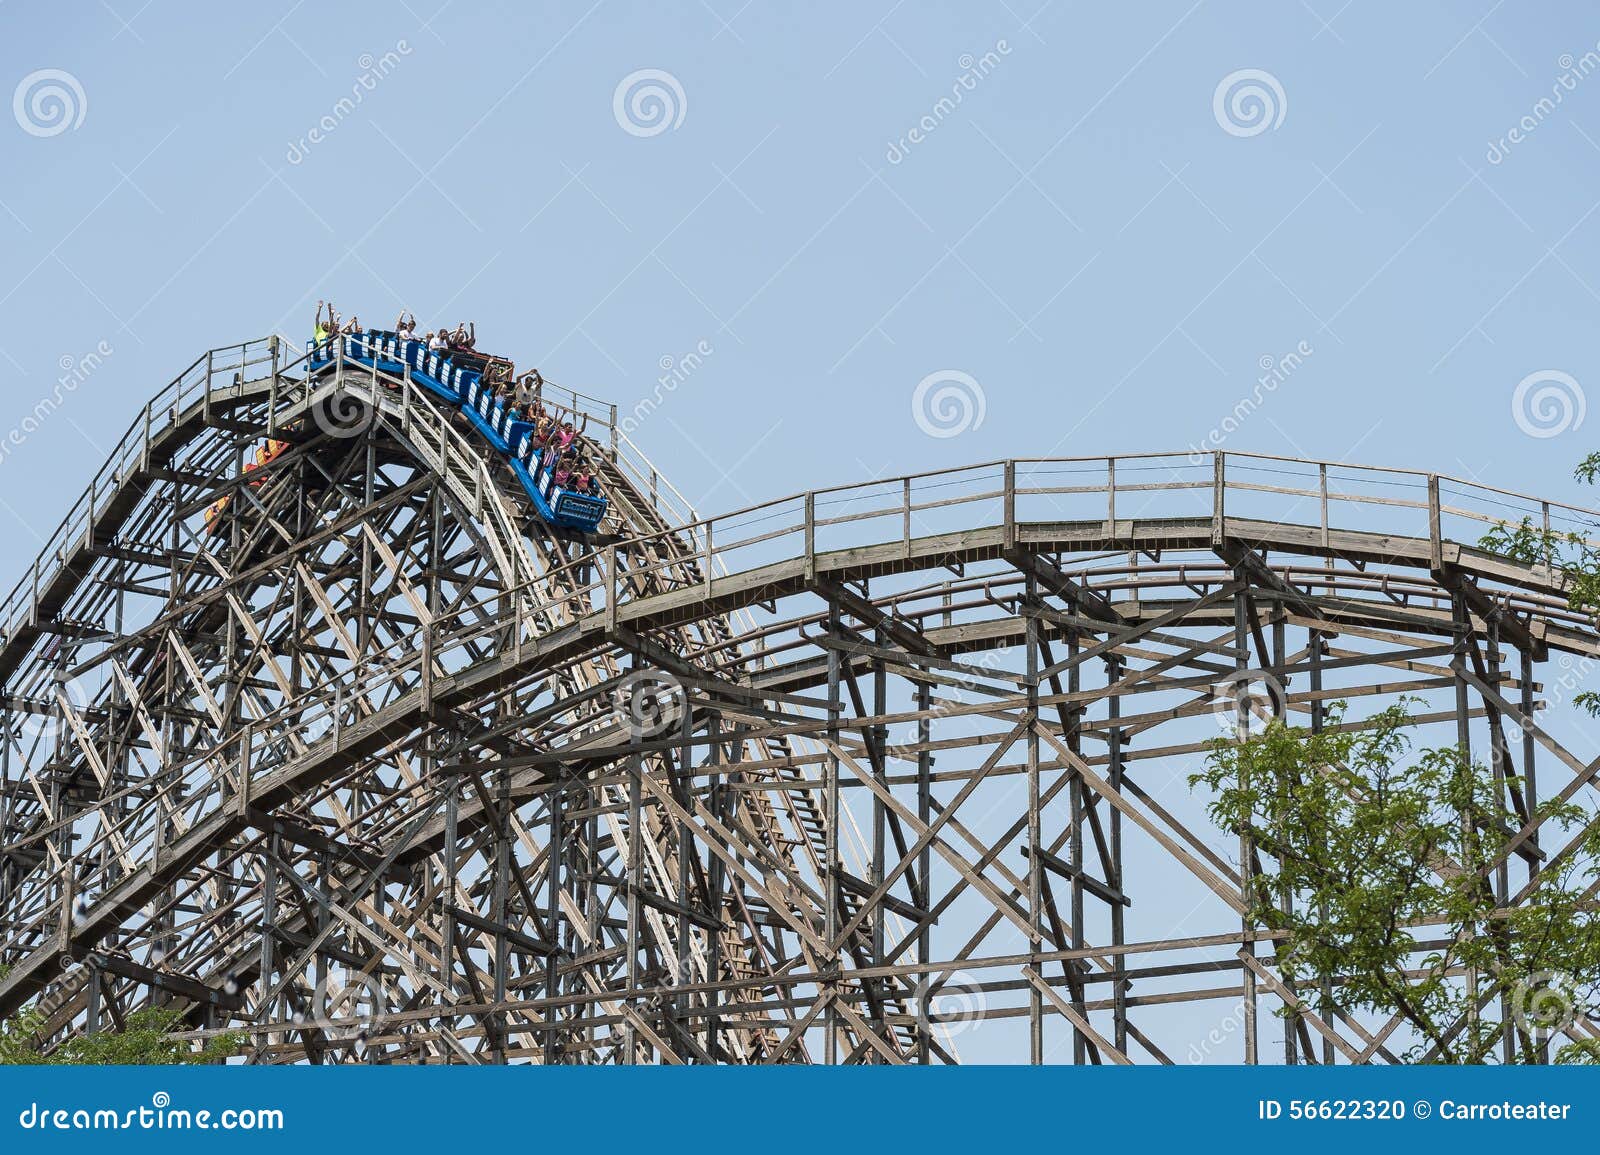 Rollercoaster stock photo. Image of action, curve, background - 56622320